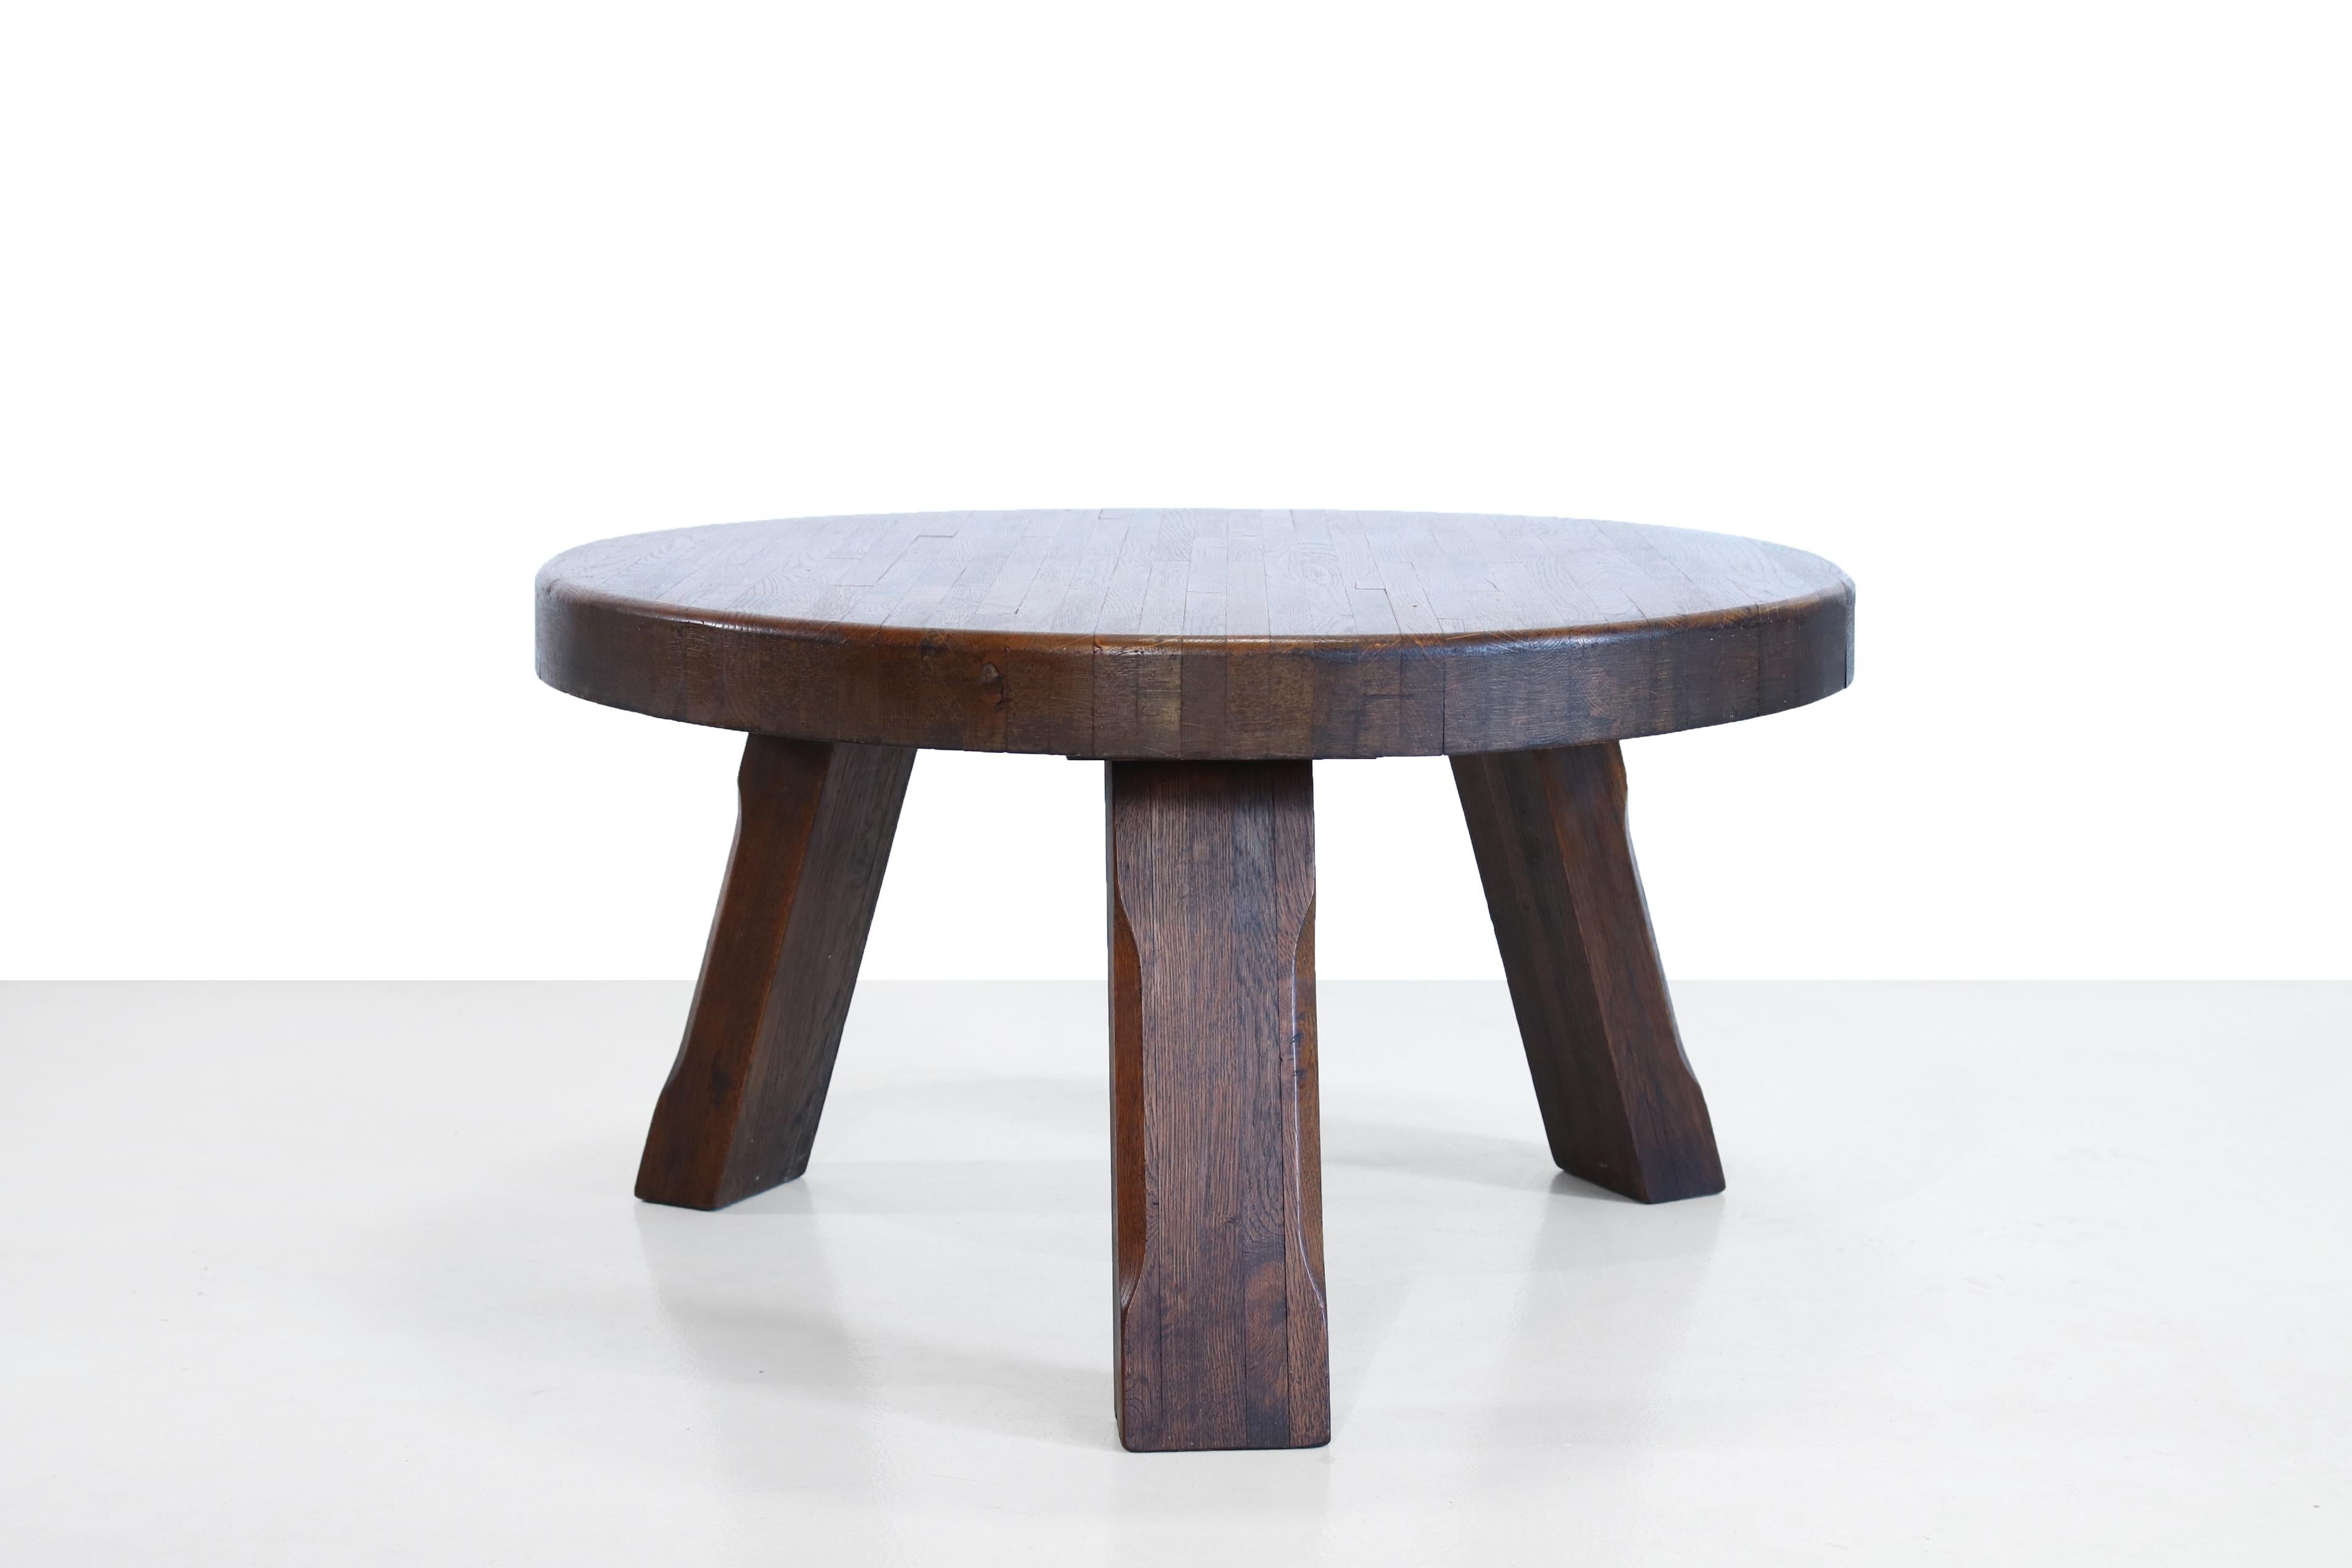 Brutalistic round coffee table from France. Handmade from solid heavy oak wood. The table stands on three legs. The table has a diameter of 80 cm and is 45 cm high.